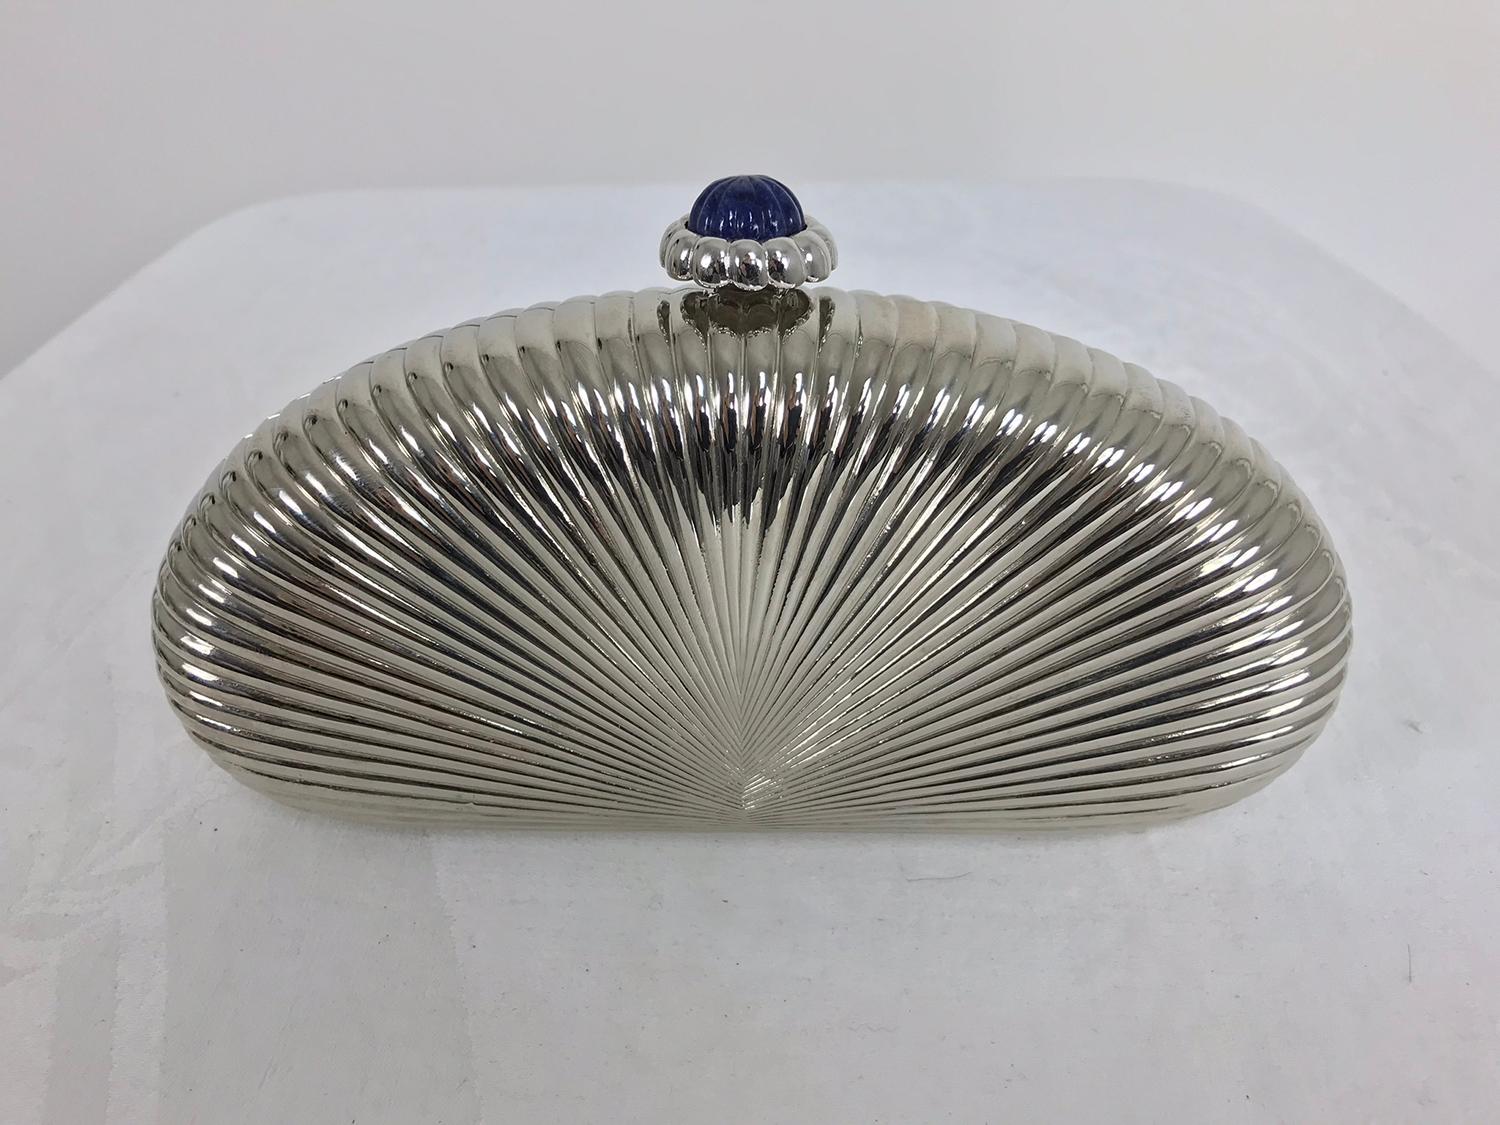 Judith Leiber silver sunburst hardside evening clutch or shoulder bag...Beautiful bag with jewel silver chain handle strap, press to open blue stone set top...Interior lined in silver...Looks barely, if ever worn...original tag price